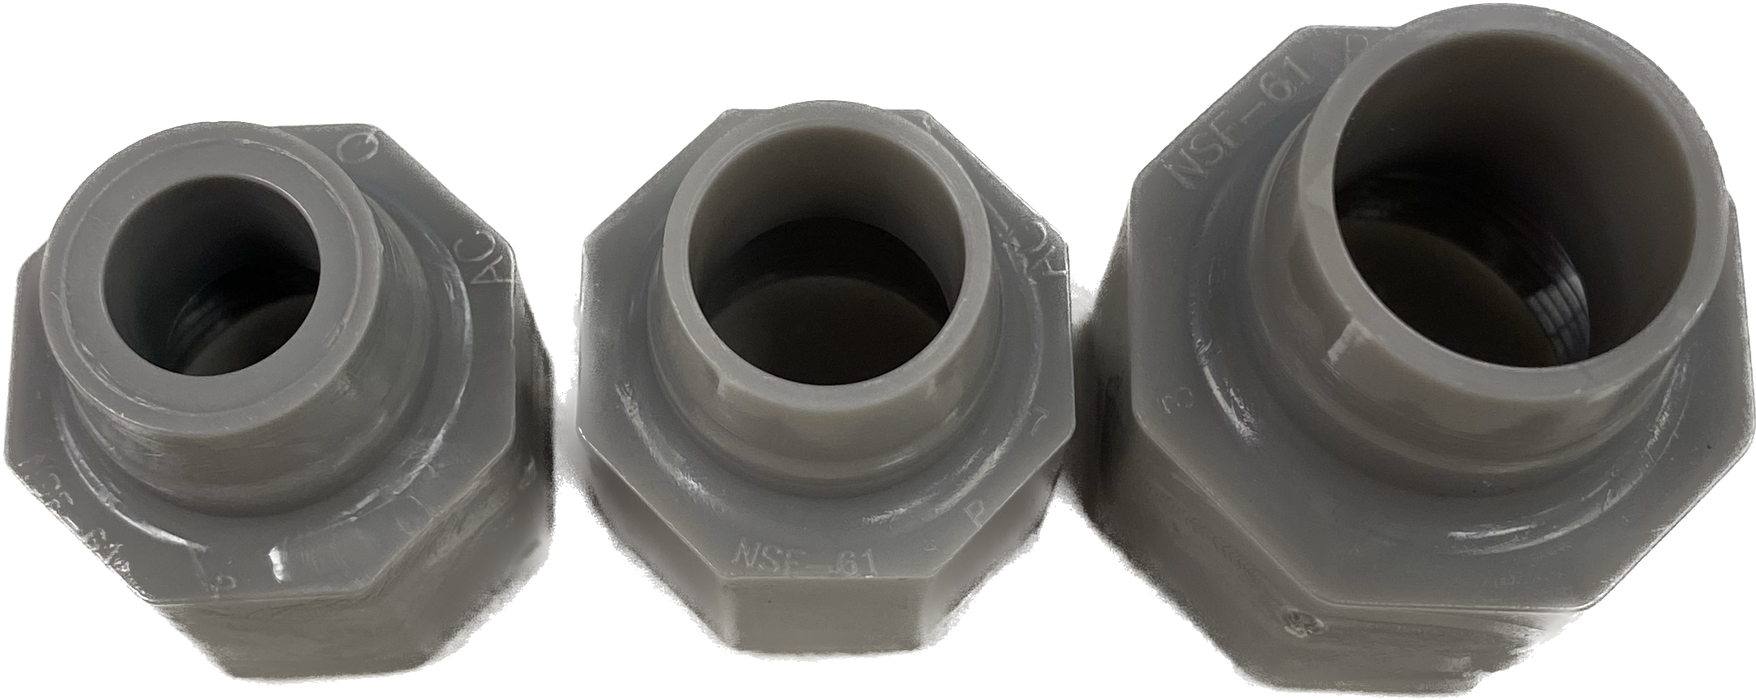 Qest Nut for Compression Fittings - ID Tubing